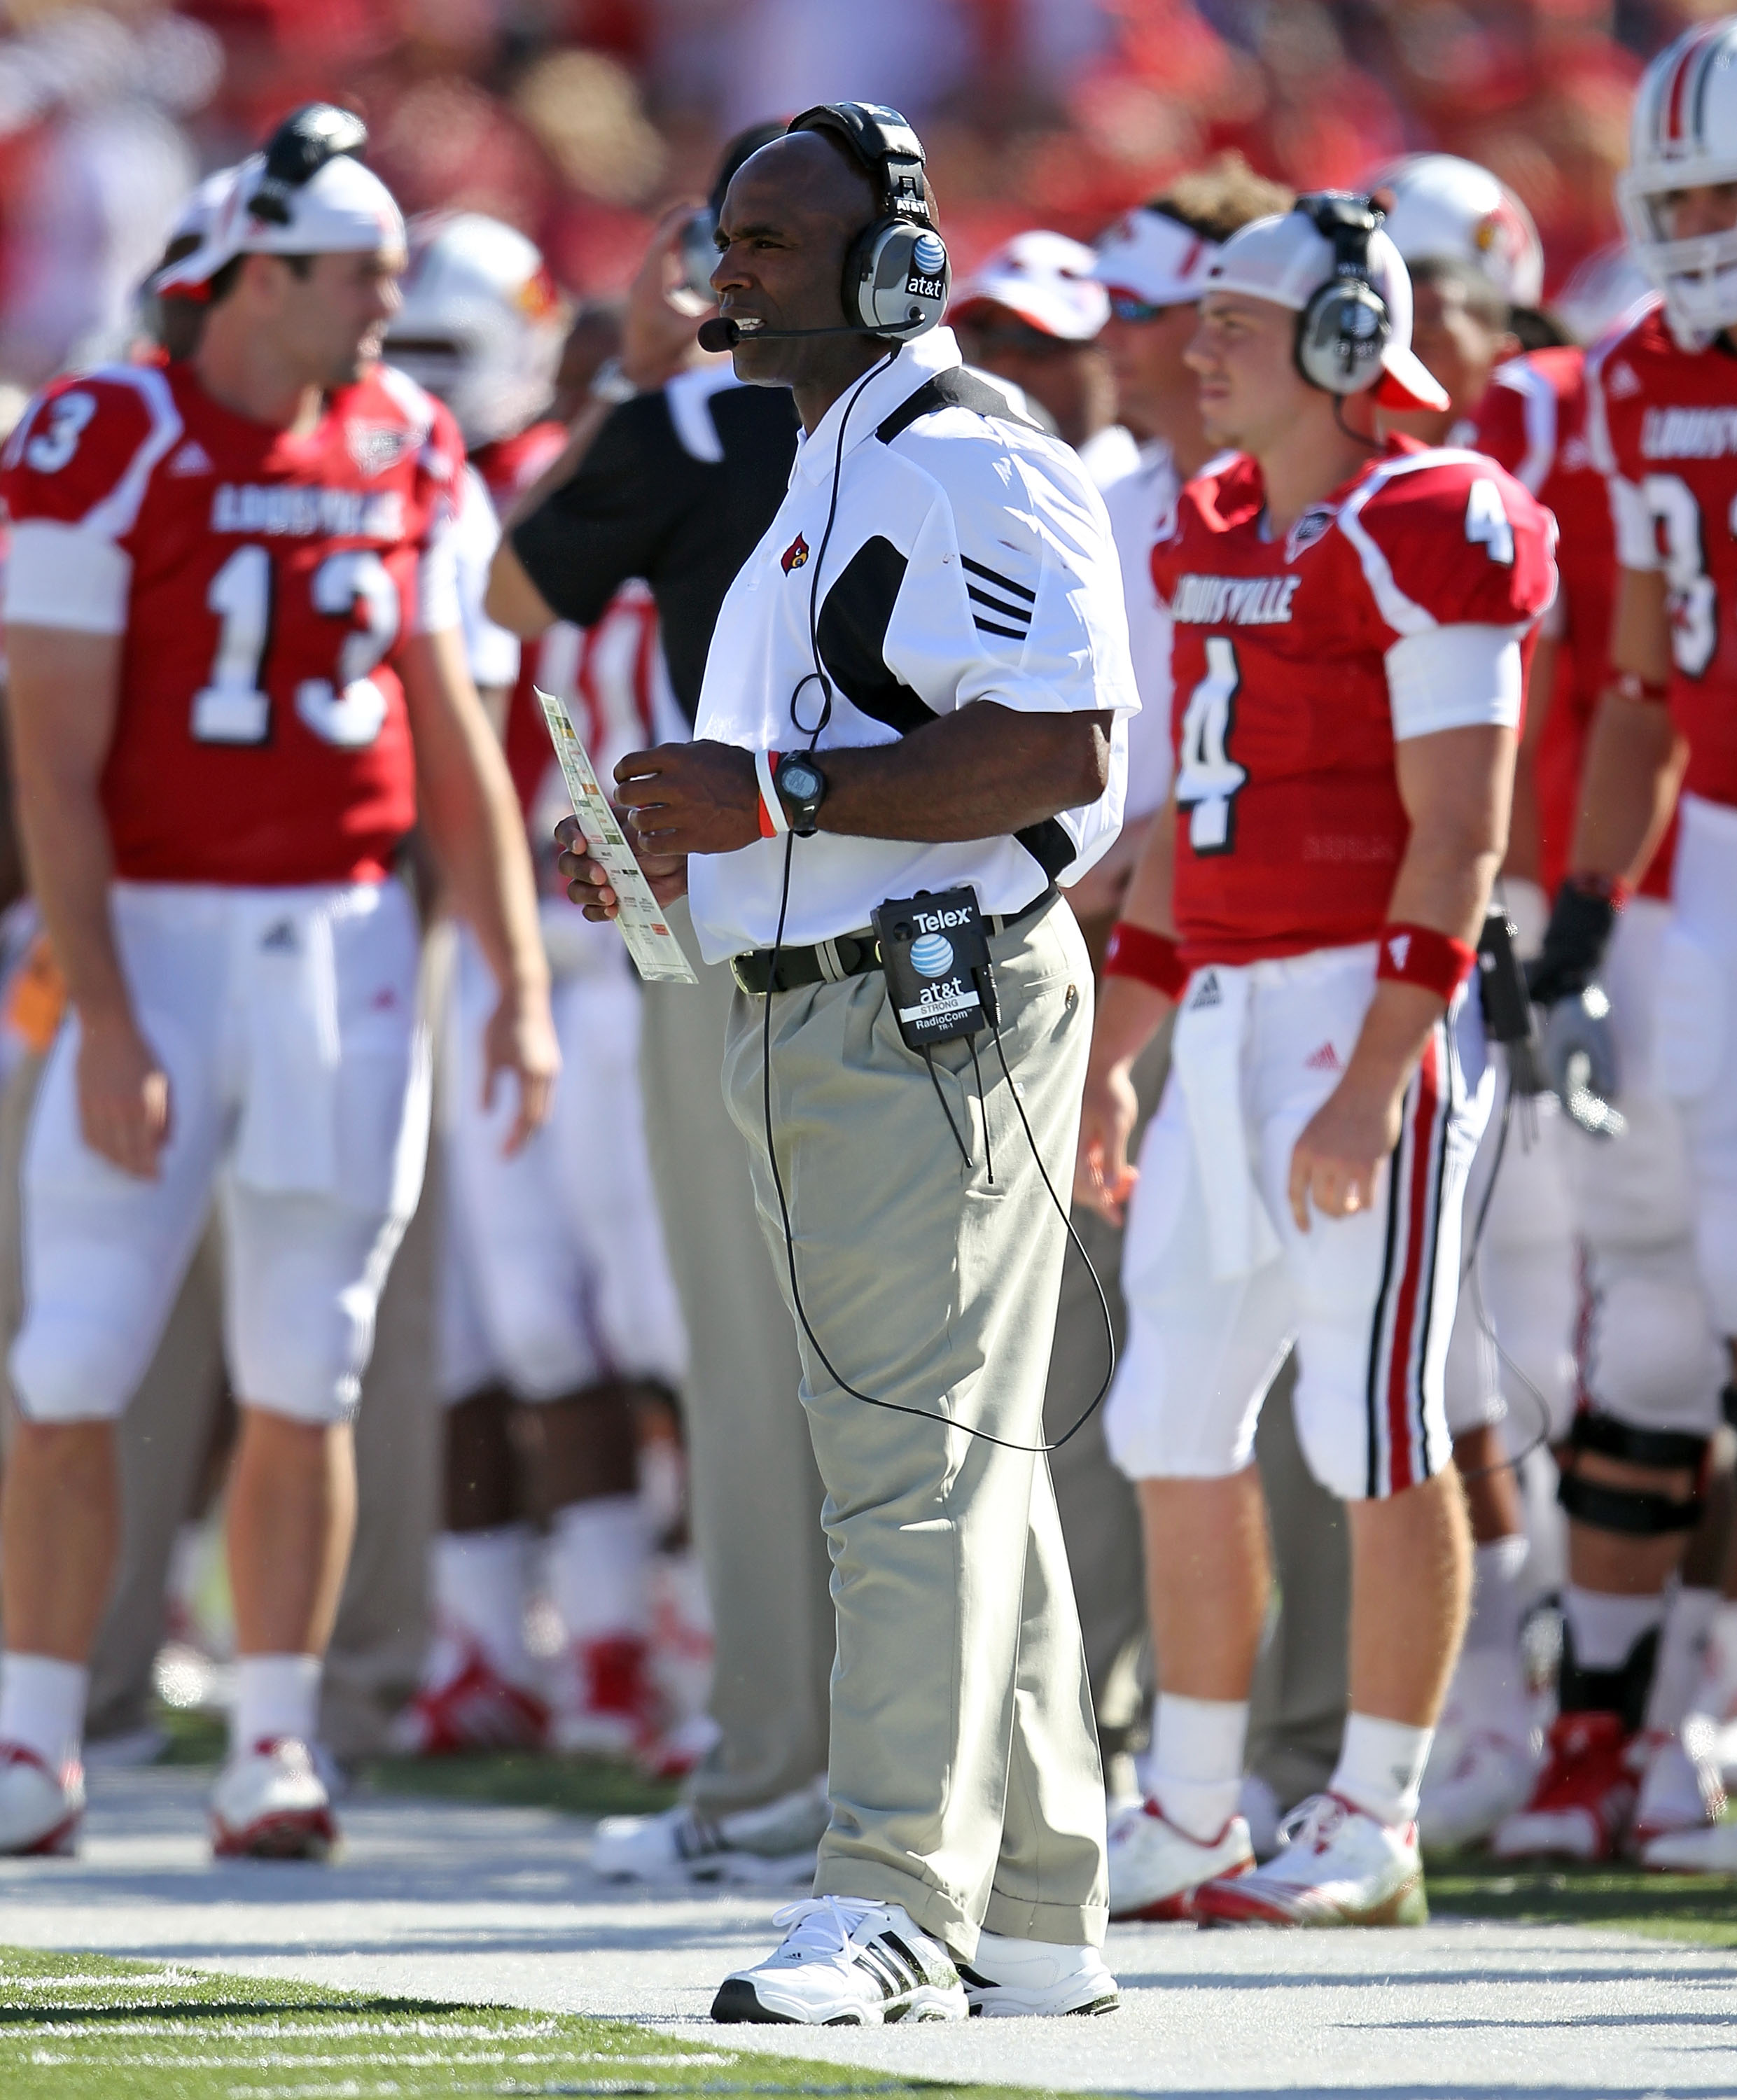 LOUISVILLE, KY - SEPTEMBER 04: Charlie Strong the Head Coach of the Louisville Cardinals gives instructions to his team during the game against the  Kentucky Wildcats at Papa John's Cardinal Stadium on September 4, 2010 in Louisville, Kentucky.  (Photo by